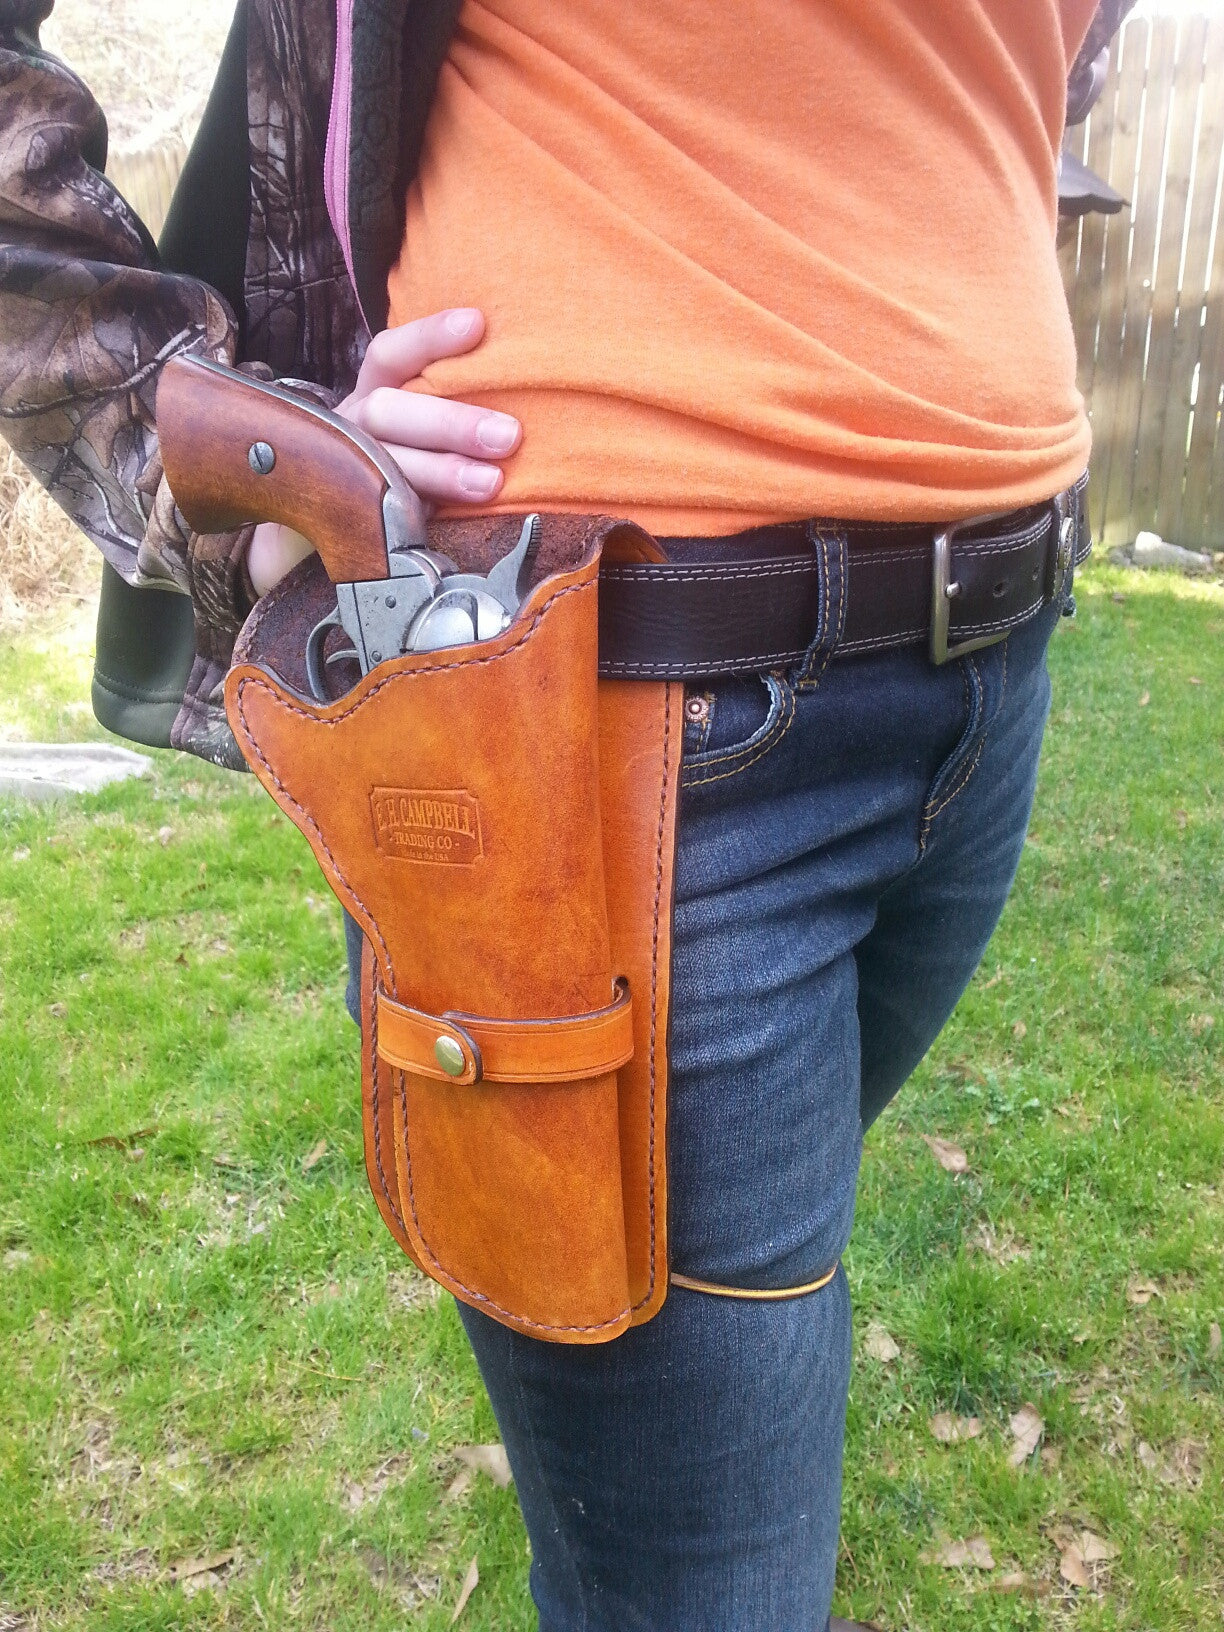 Lawman Western Holster with Leg Ties - Up to 7 1/2 inch Barrels ...